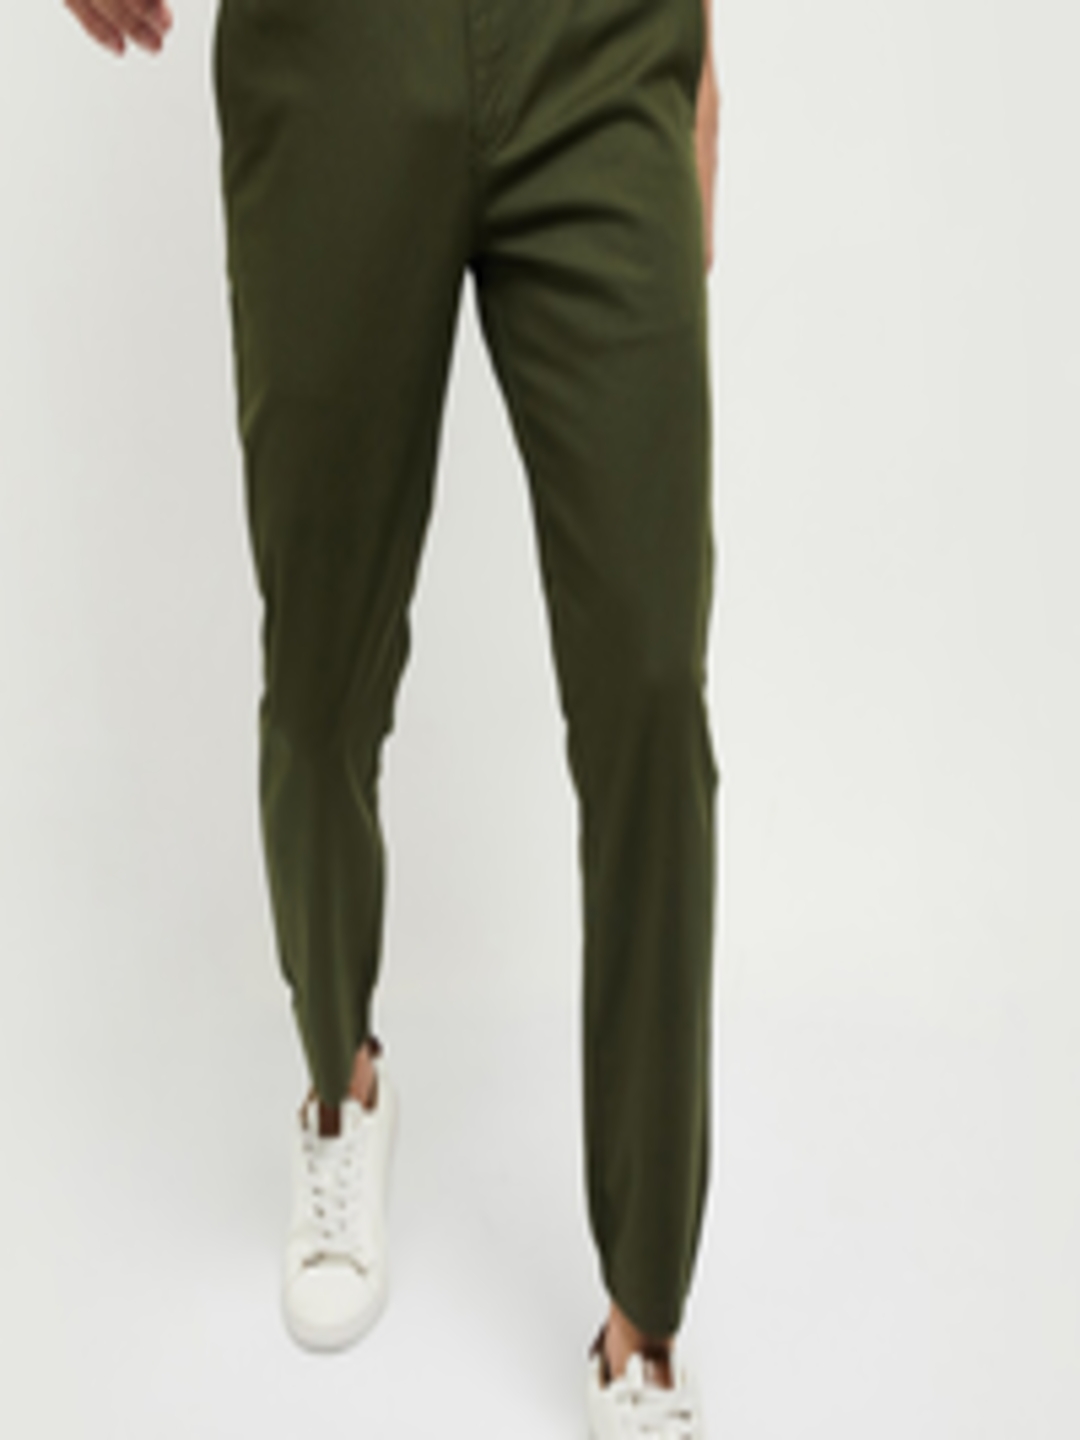 Buy Max Men Green Trousers - Trousers for Men 15263198 | Myntra